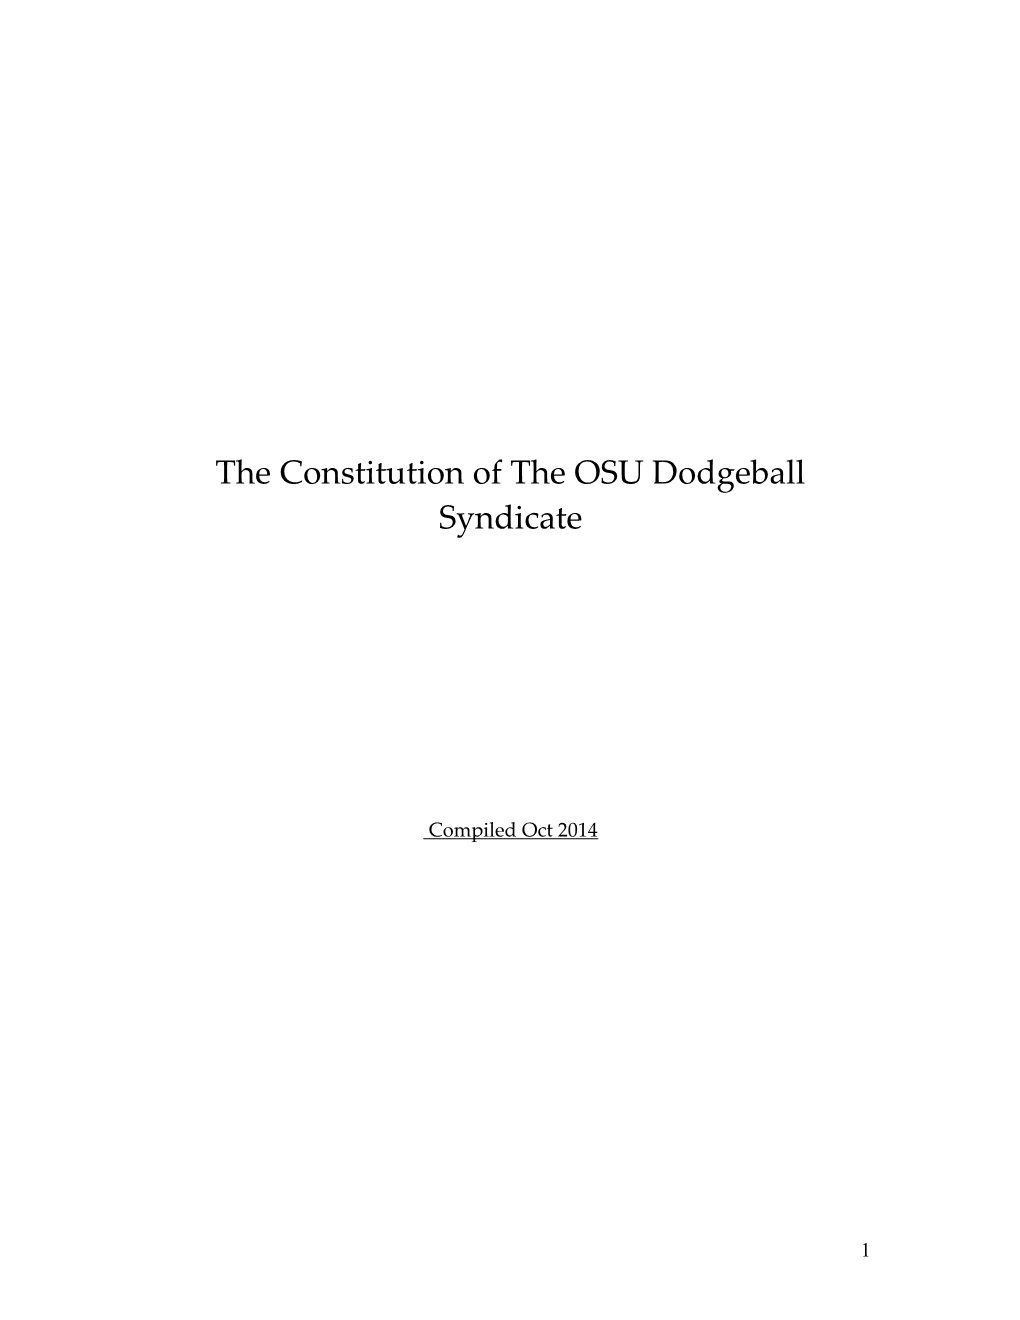 The Constitution of the OSU Dodgeball Syndicate